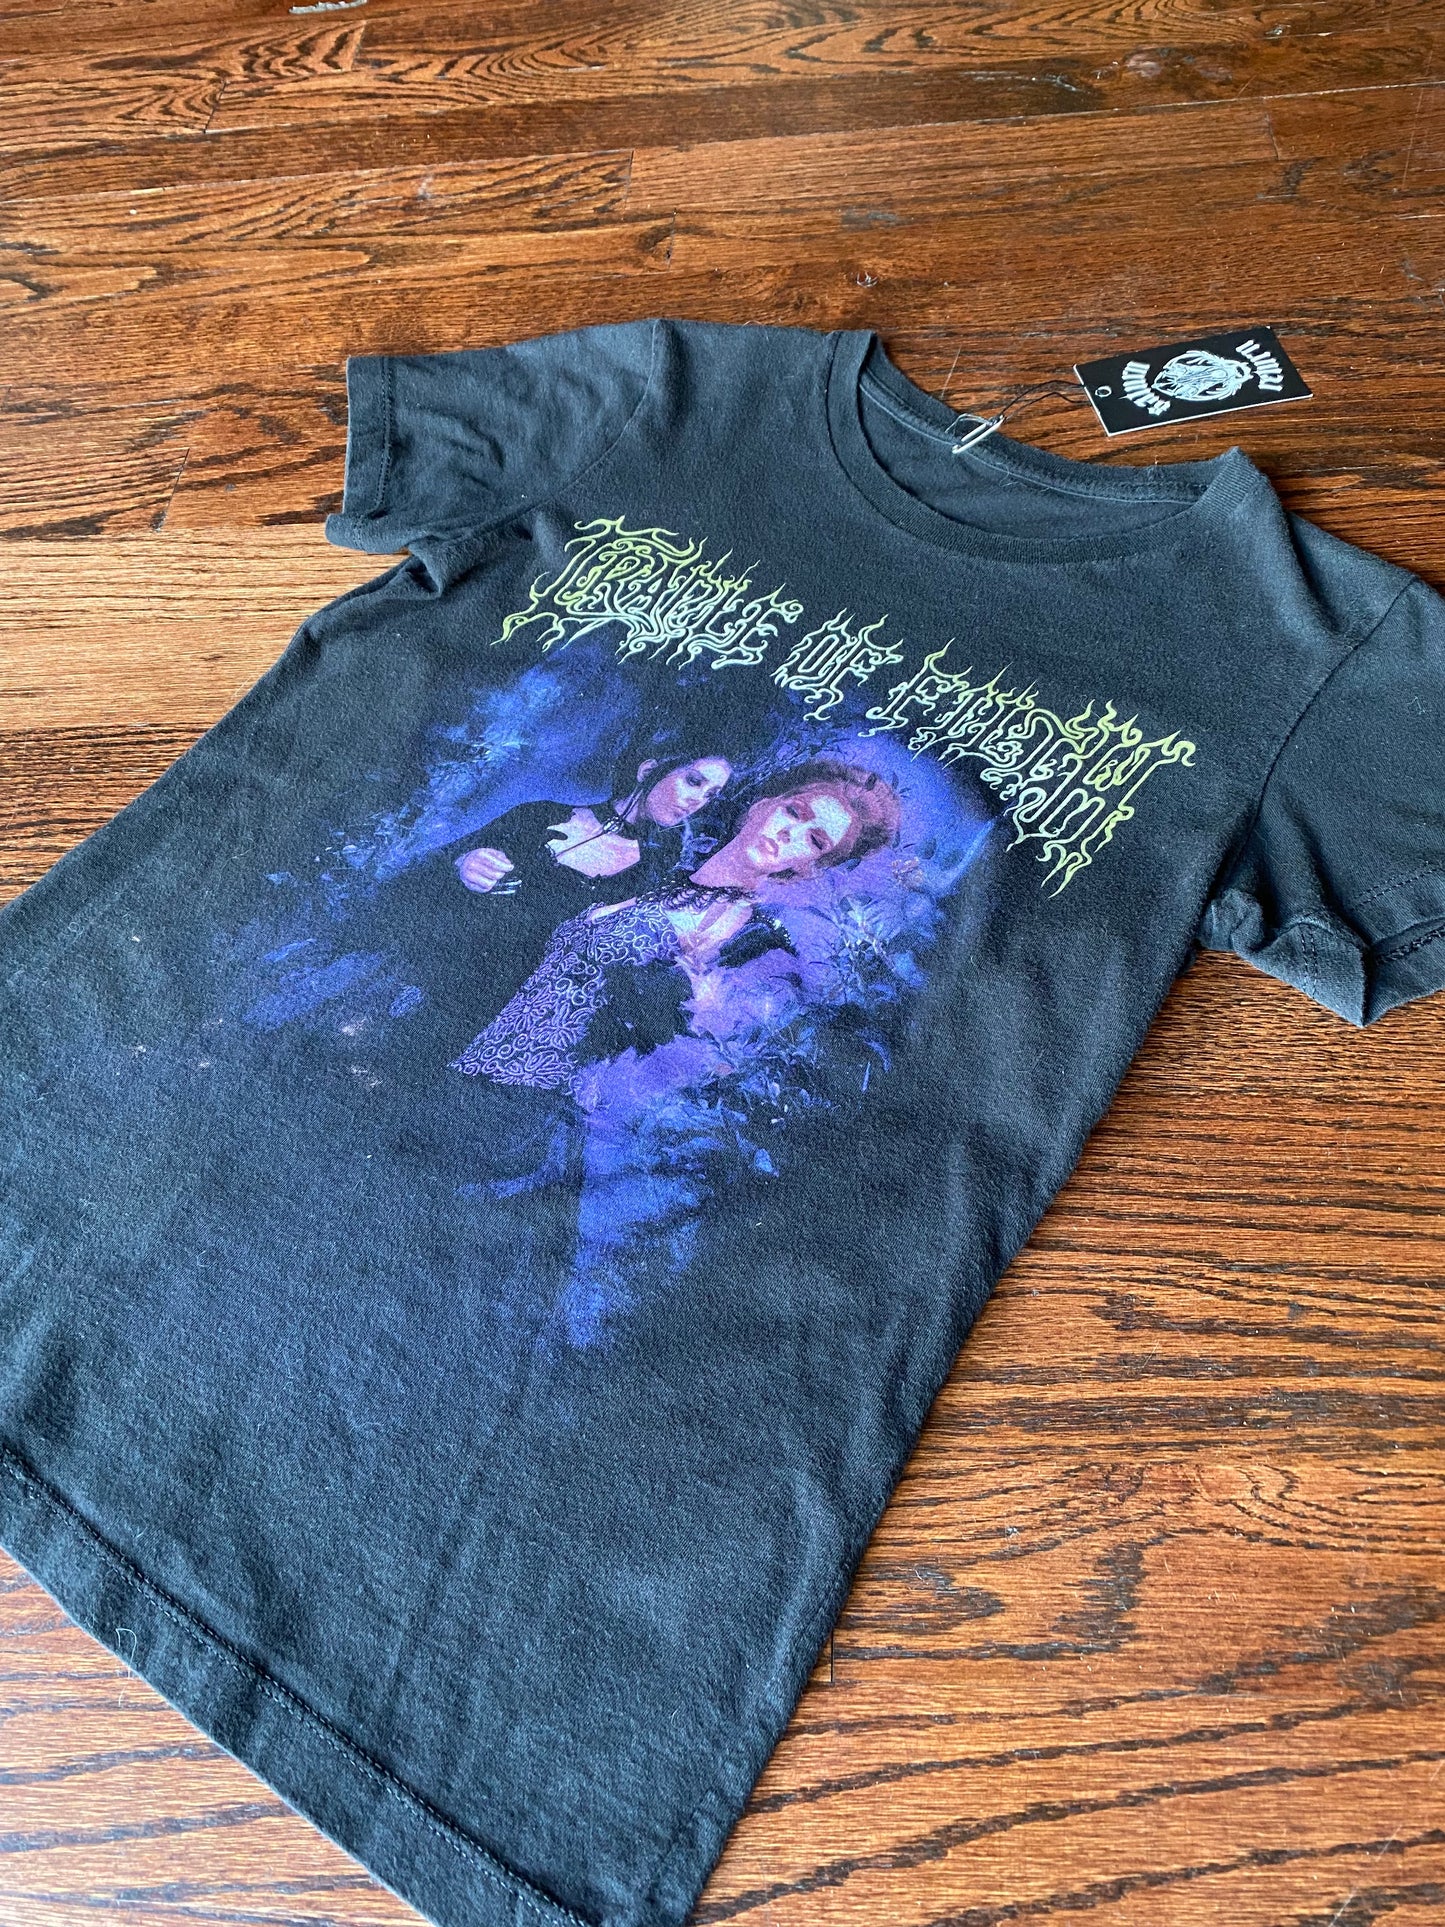 Cradle Of Filth “Achingly Beautiful” T-Shirt